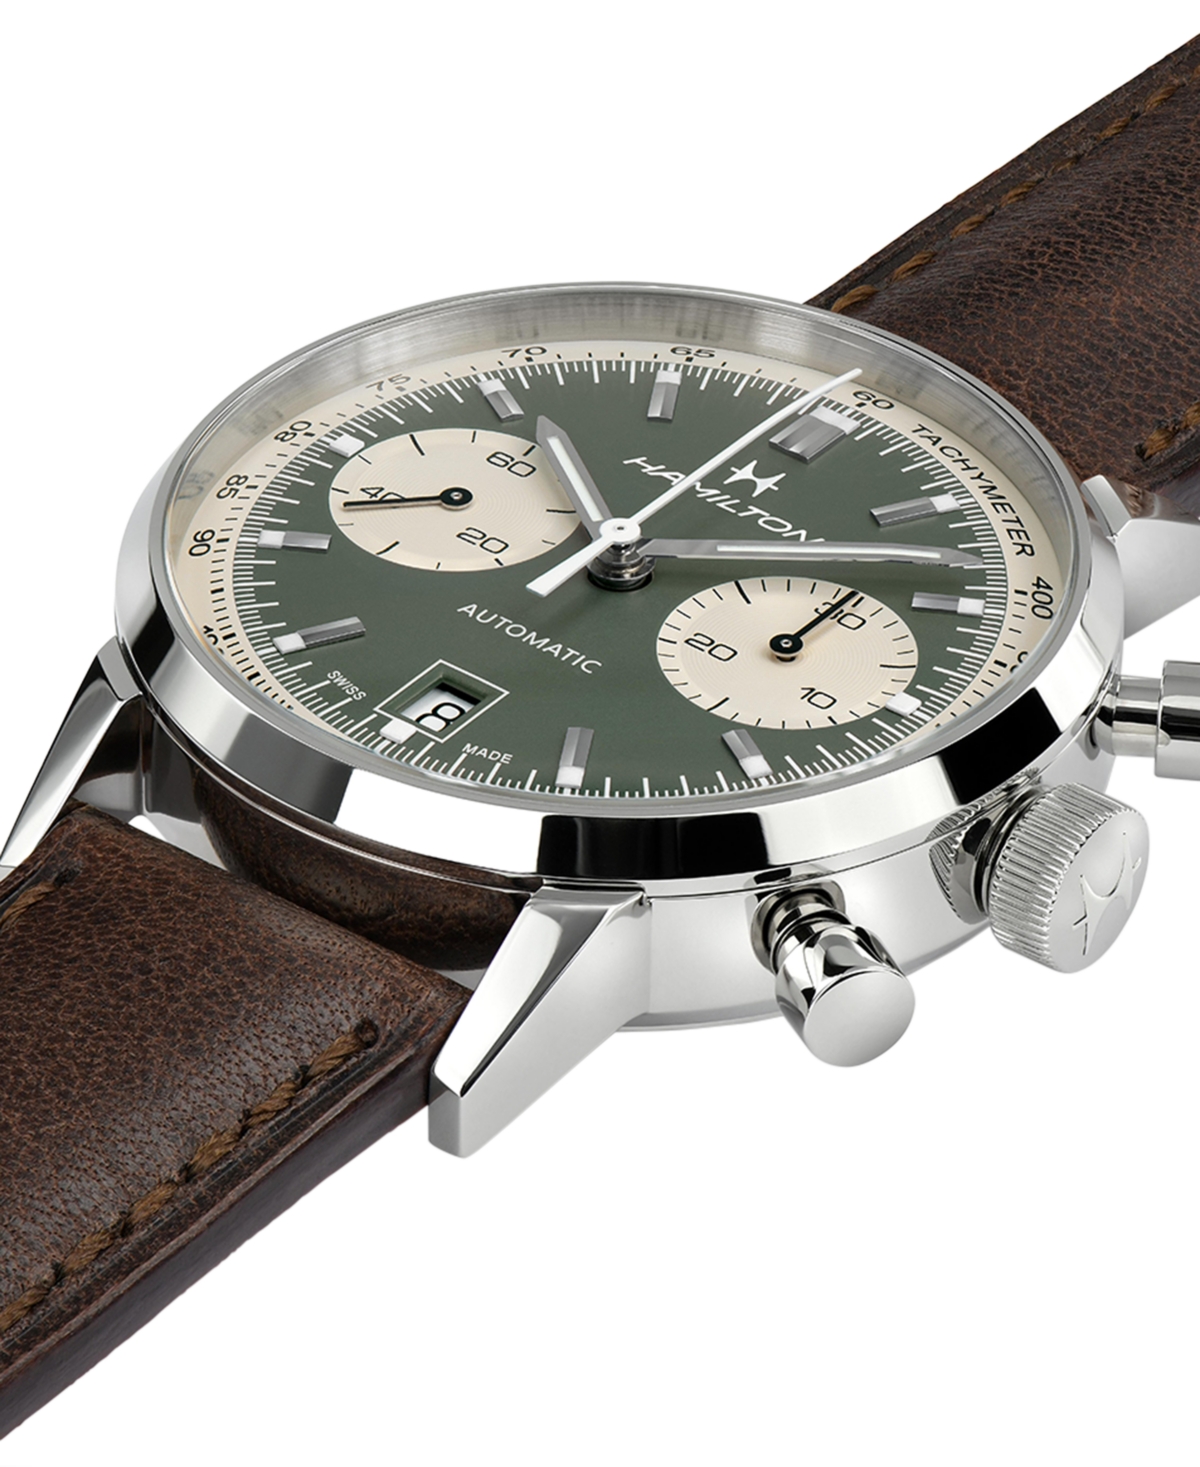 Shop Hamilton Men's Swiss Chronograph Intra-matic Brown Leather Strap Watch 40mm